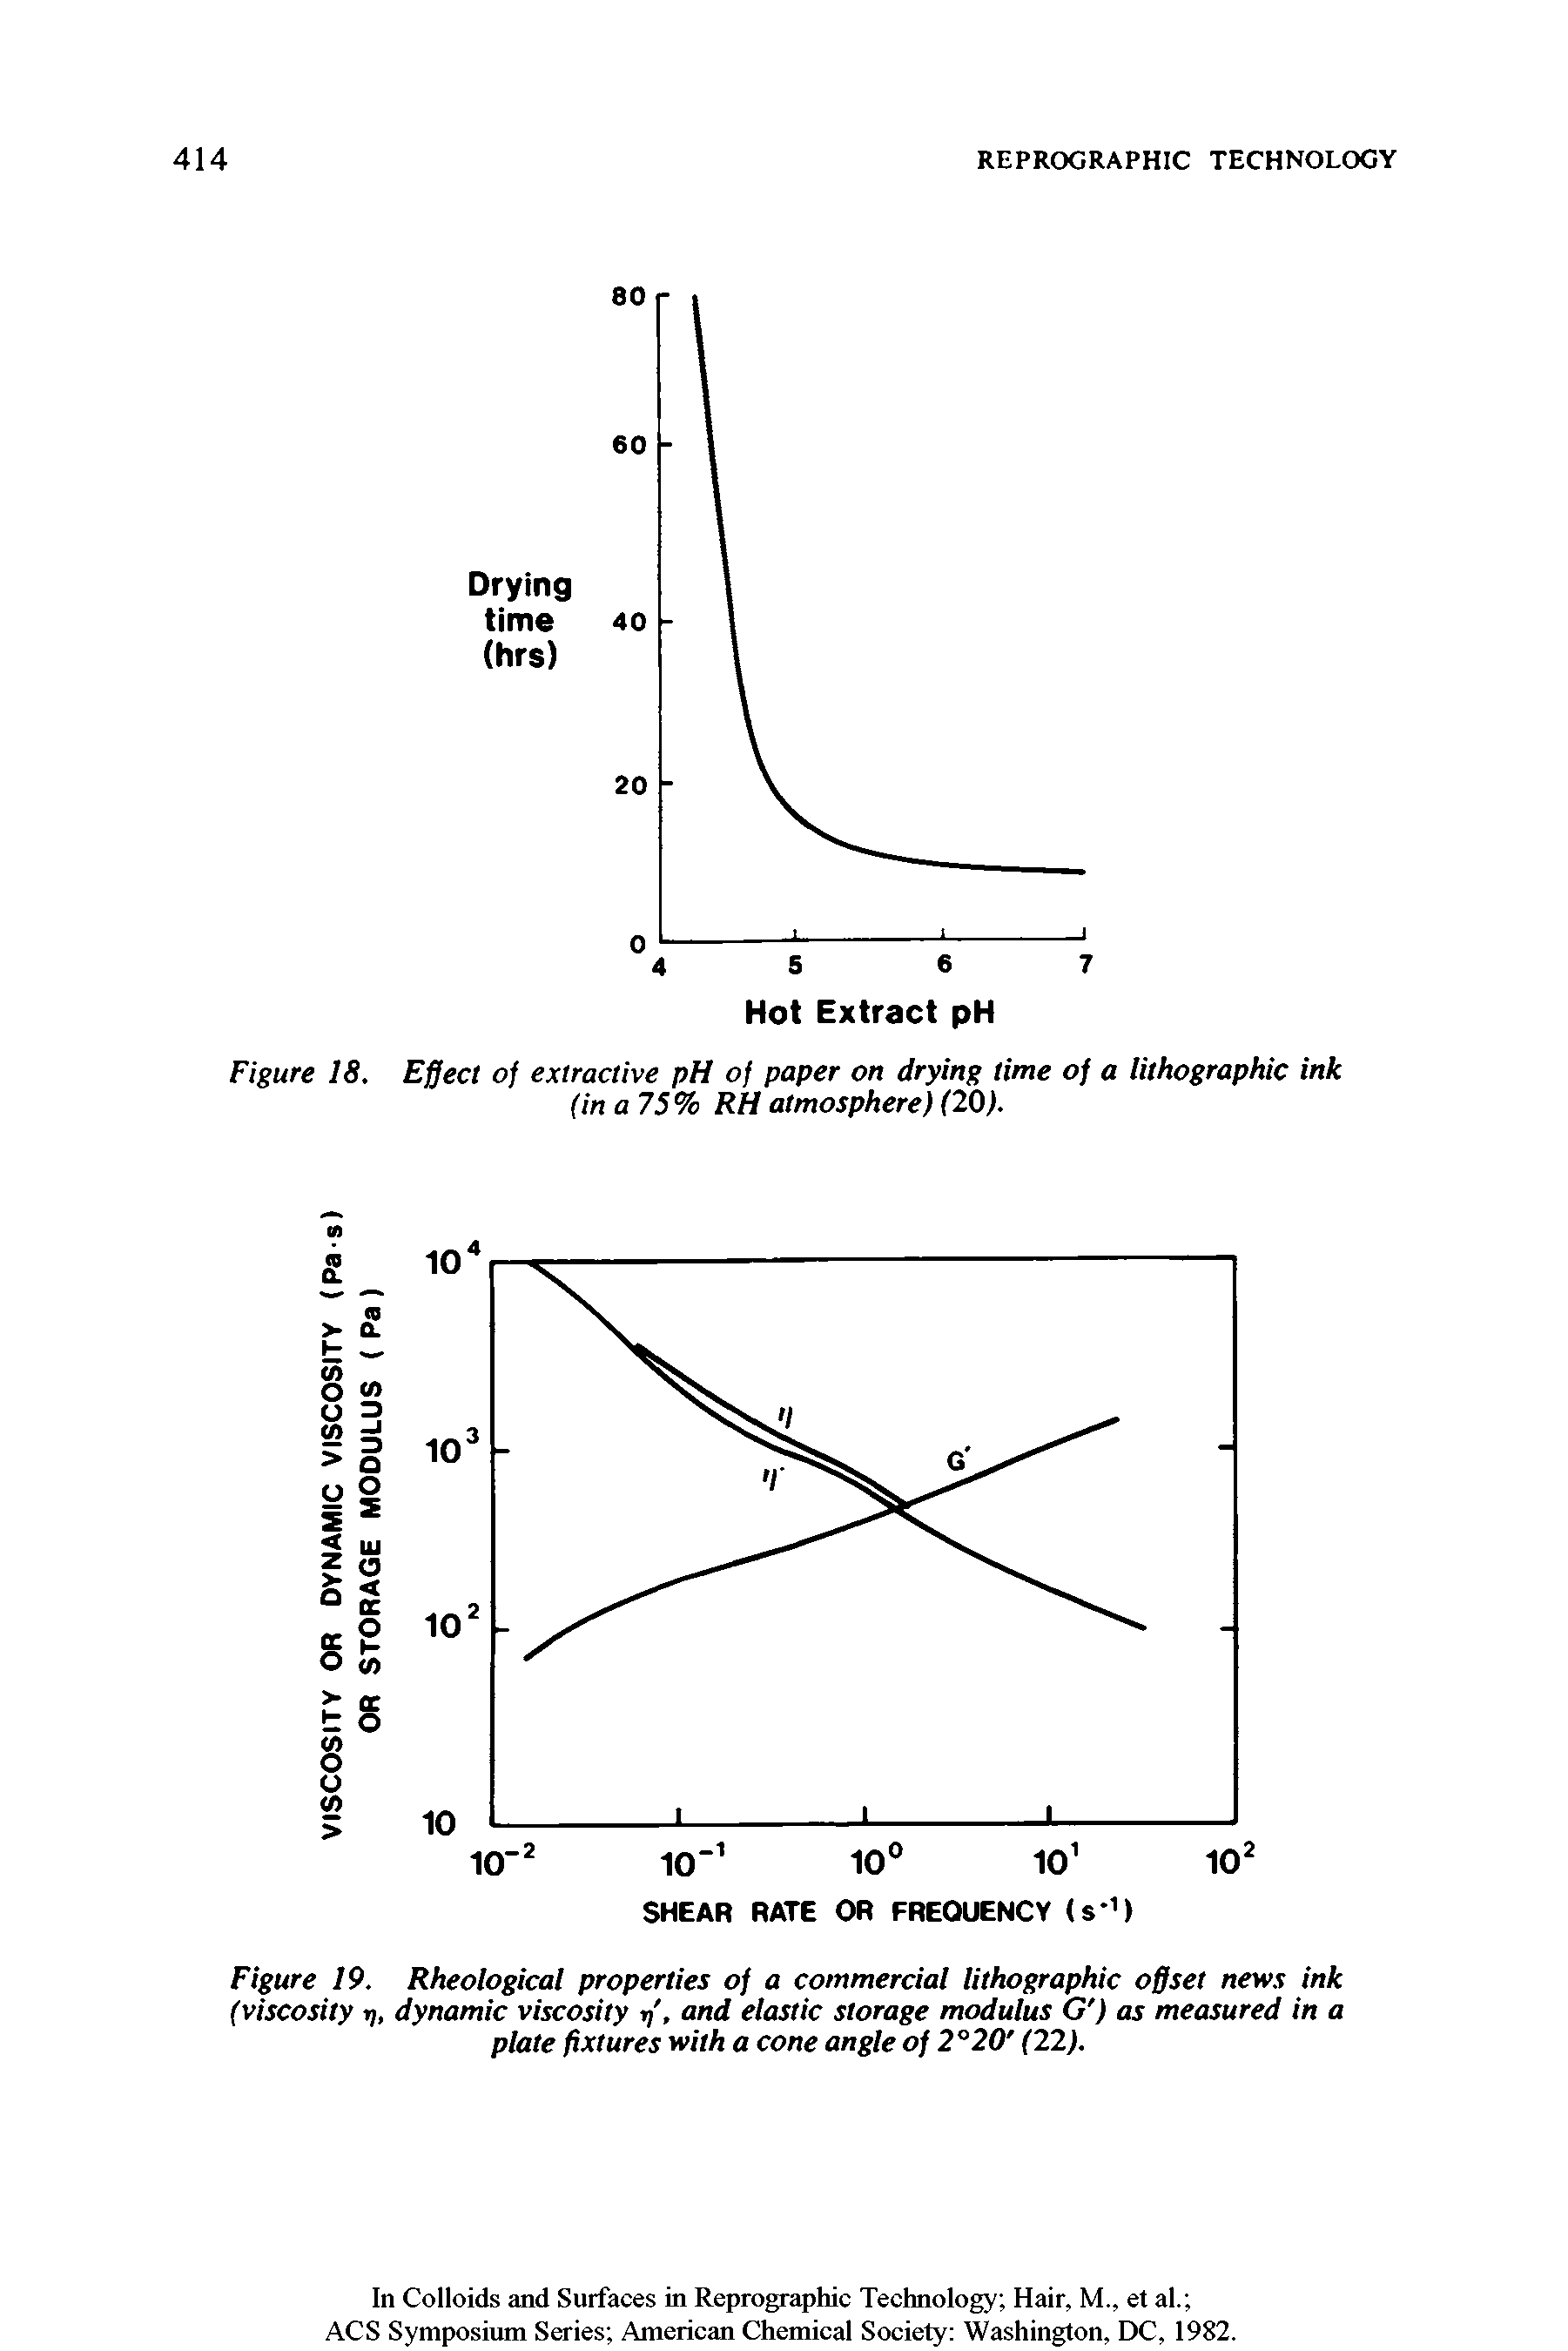 Figure 18. Effect of extractive pH of paper on drying time of a lithographic ink (in a 75% RH atmosphere) (20).